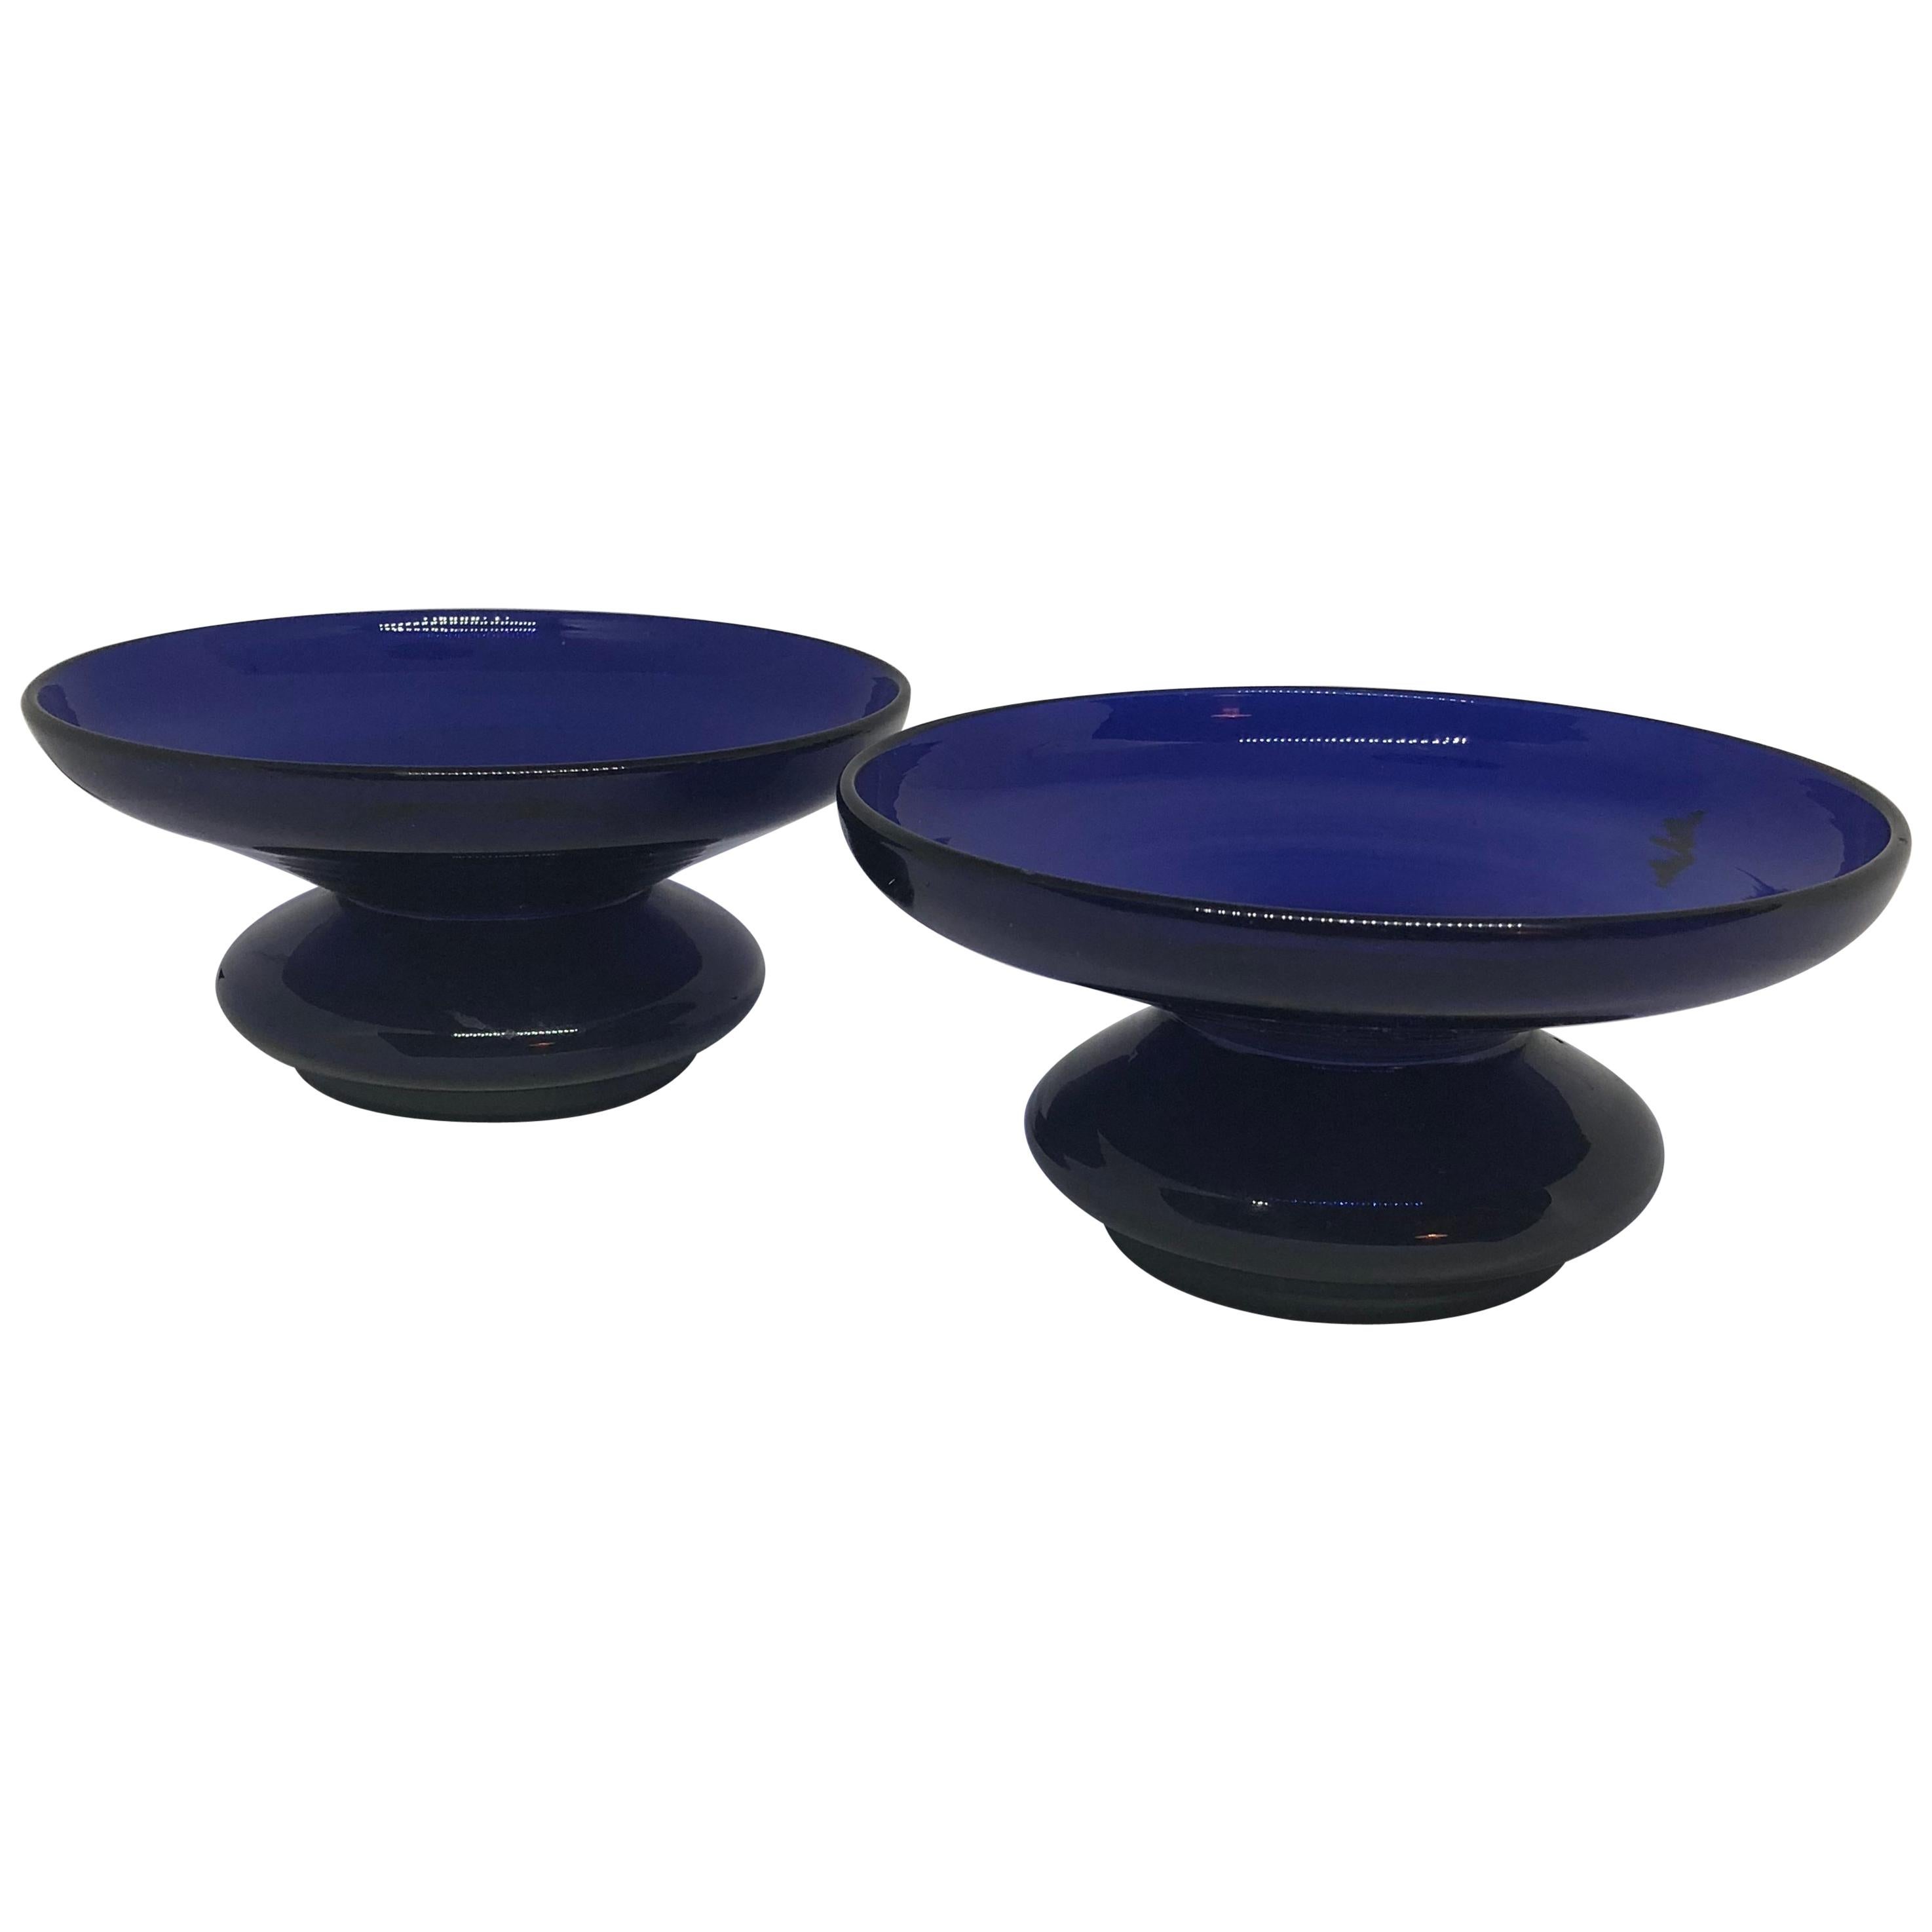 Two cobalt blue candy bowls, 19th century, Sweden.